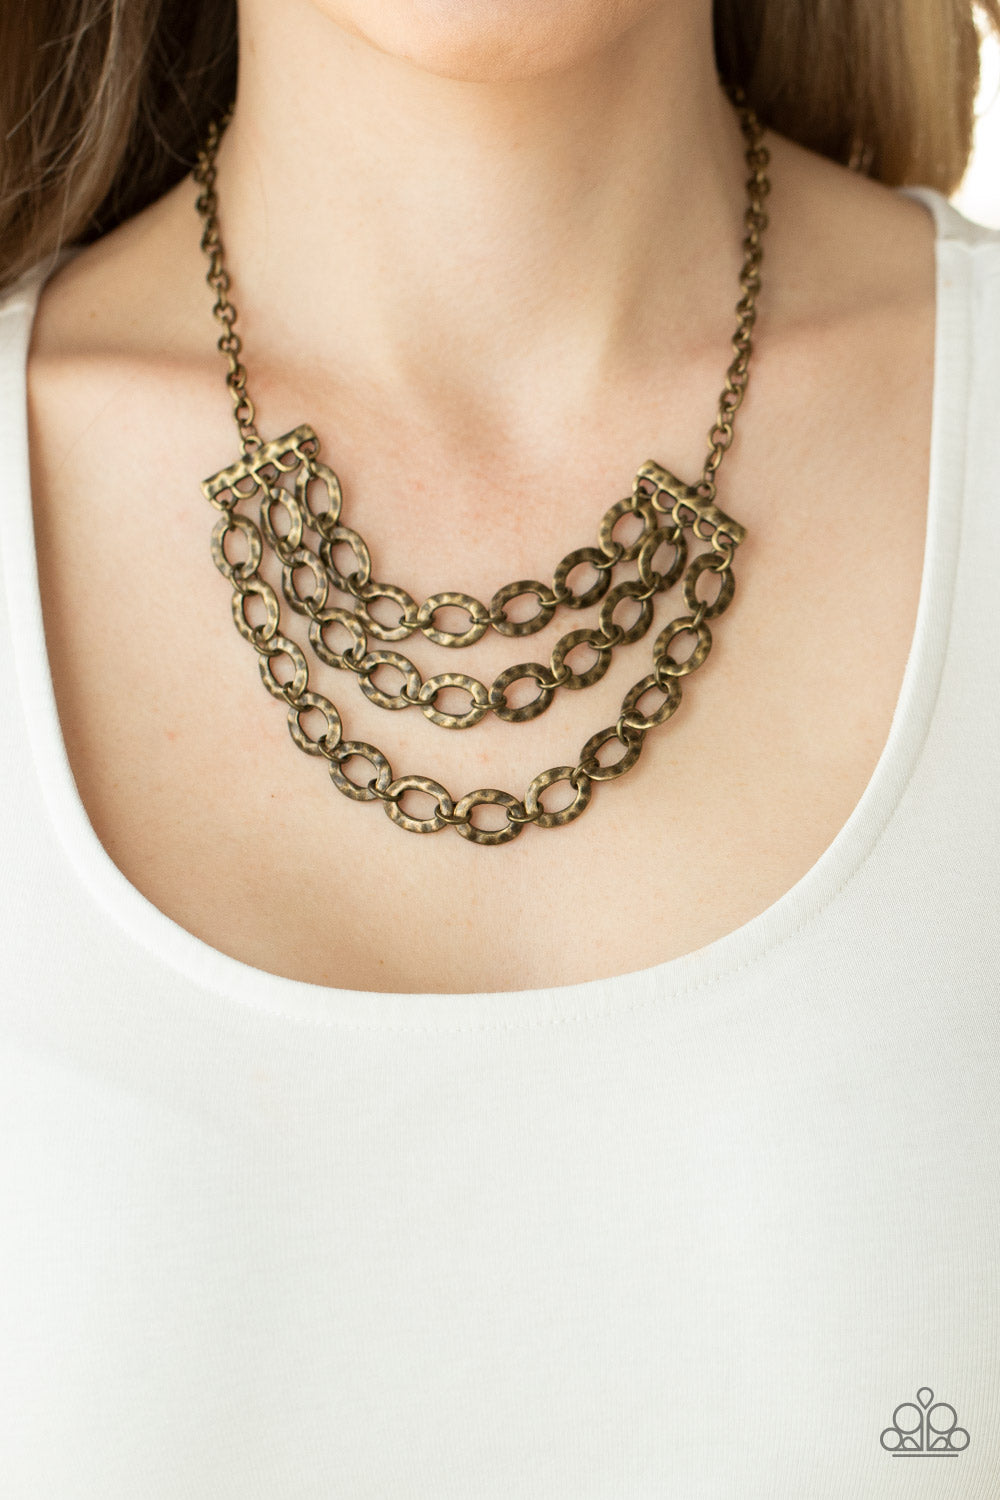 Repeat After Me - Brass Necklaces three rows of antiqued brass chains with oversized hammered oval links attach to brass bars for an edgy display below the collar. Features an adjustable clasp closure.  Sold as one individual necklace. Includes one pair of matching earrings.  Paparazzi Jewelry is lead and nickel free so it's perfect for sensitive skin too!